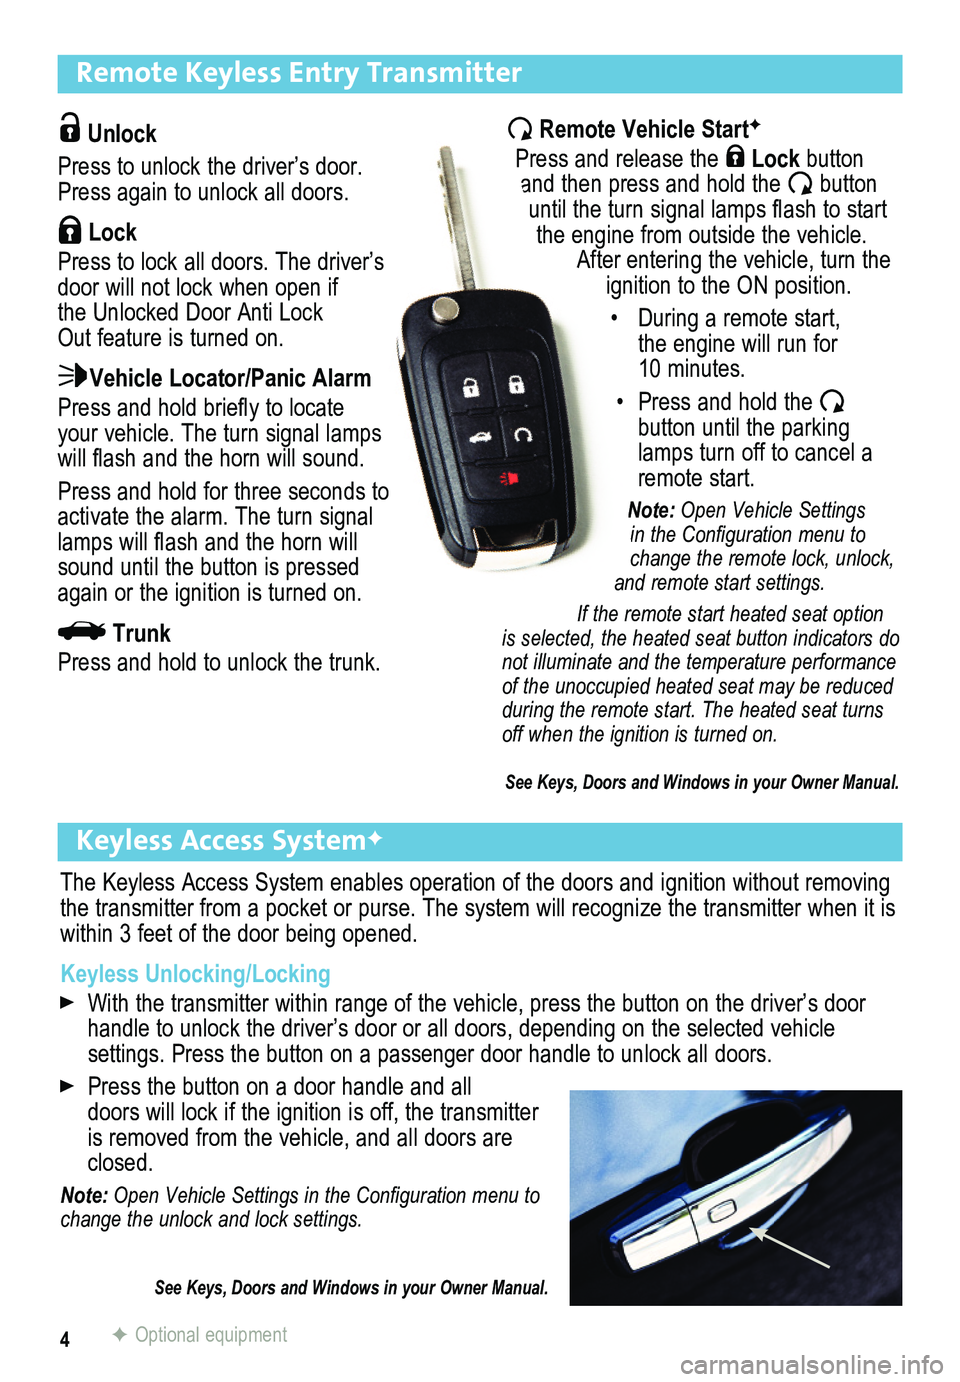 BUICK ENCLAVE 2013  Get To Know Guide 4
Remote Keyless Entry Transmitter
Keyless Access SystemF
The Keyless Access System enables operation of the doors and ignition wi\
thout removing the transmitter from a pocket or purse. The system wi